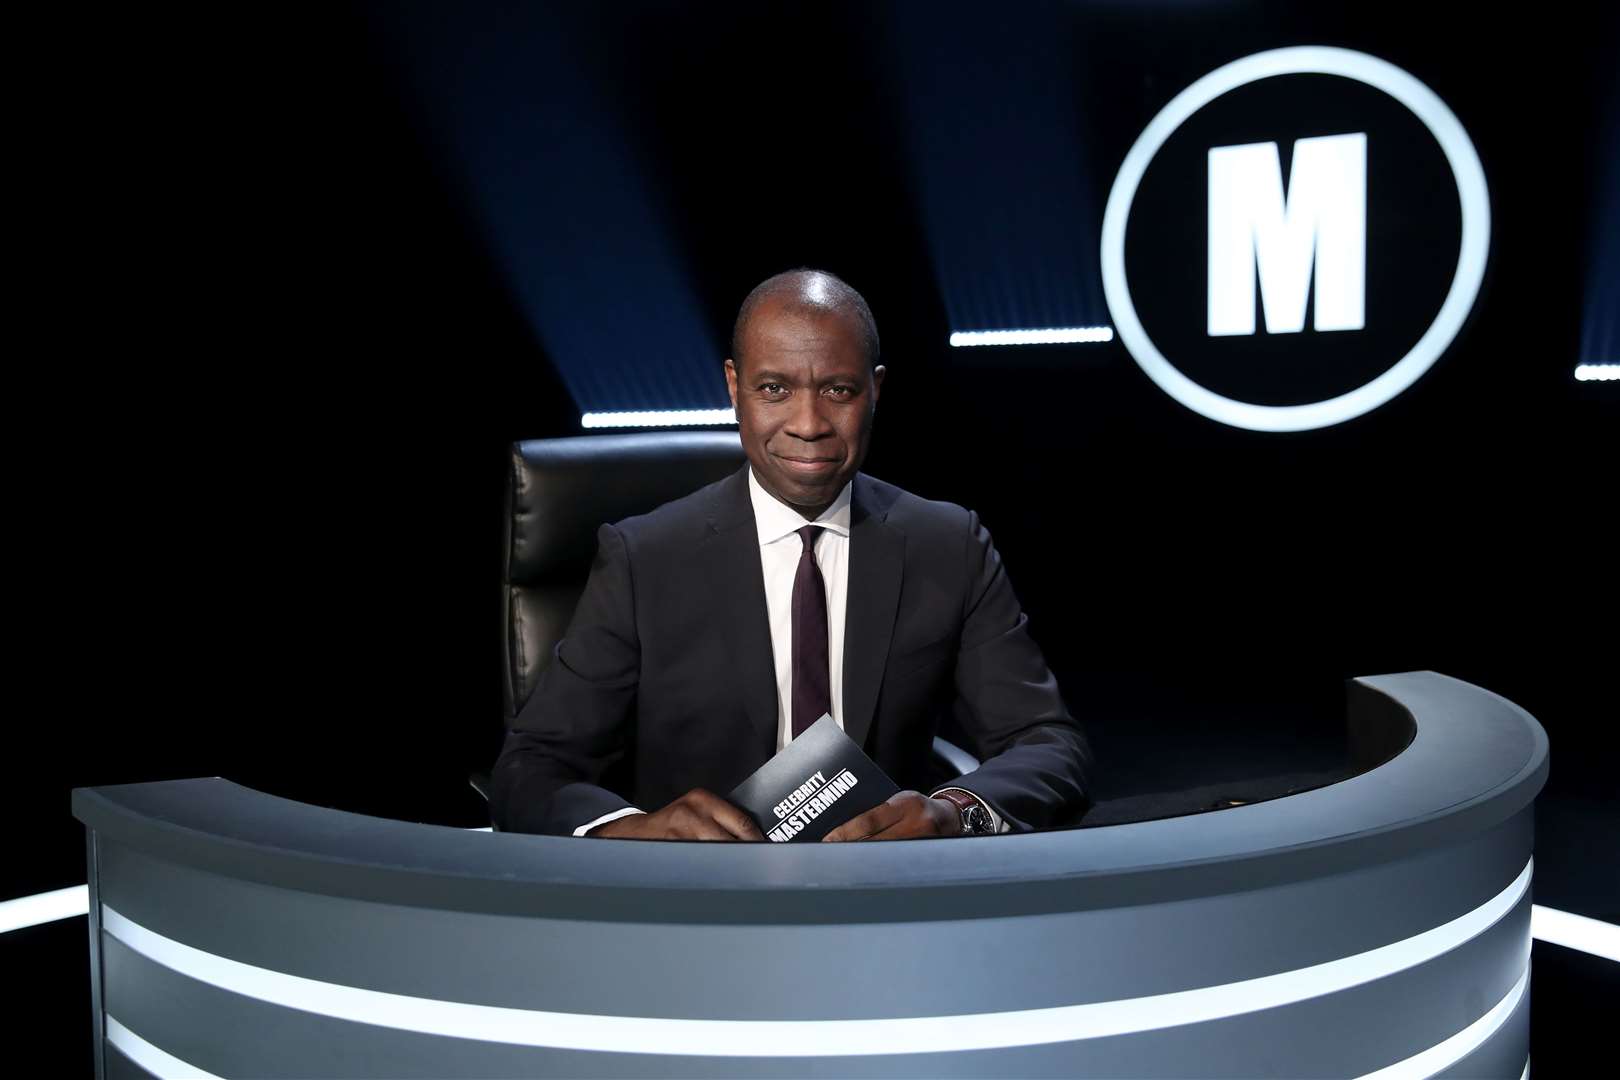 Clive Myrie, the current host of Mastermind. Picture: BBC / Hindsight and Hat Trick Productions